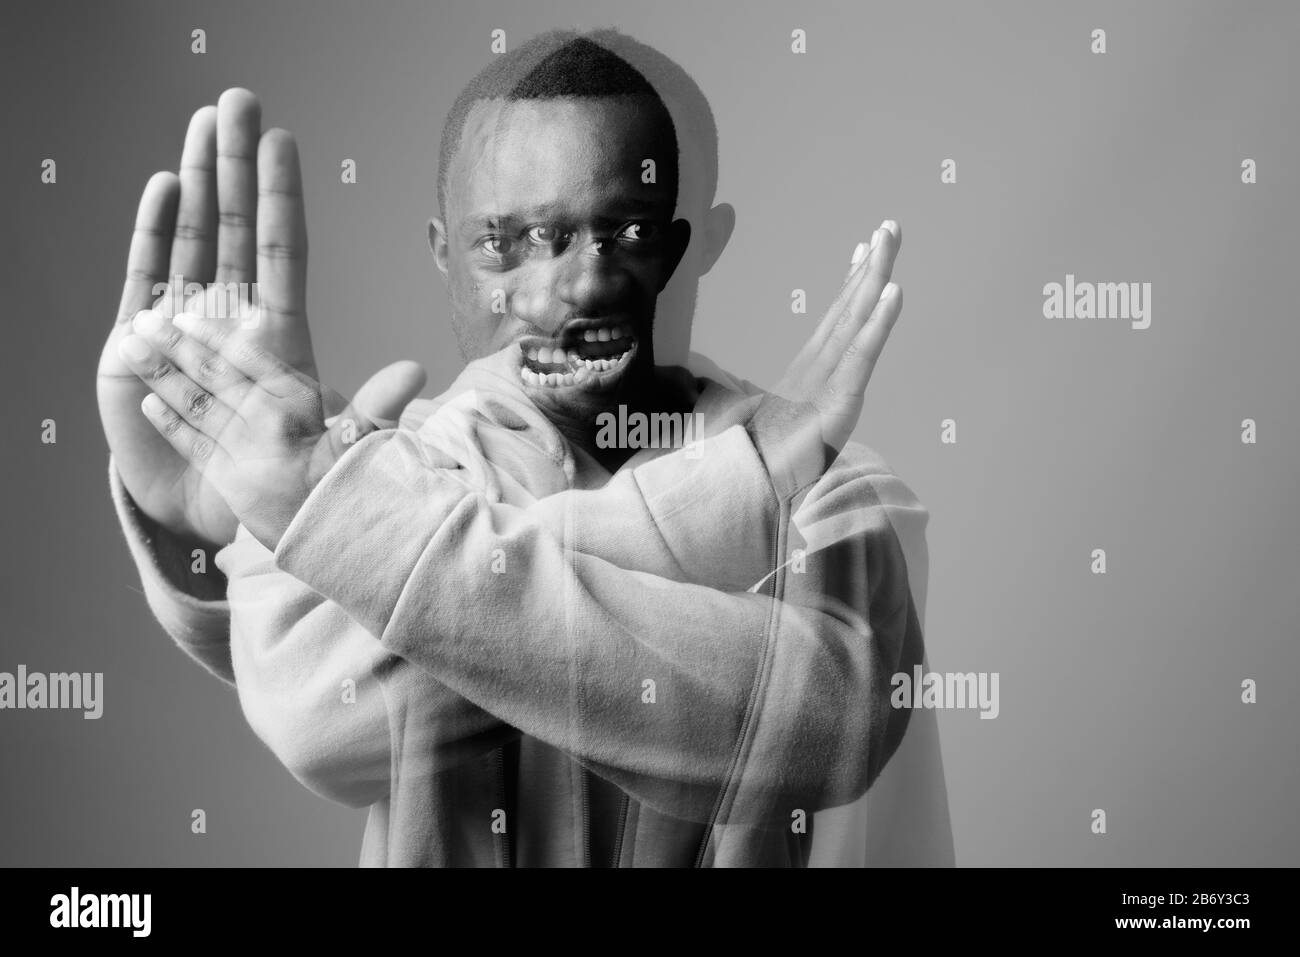 Portrait of young African man against gray background Stock Photo